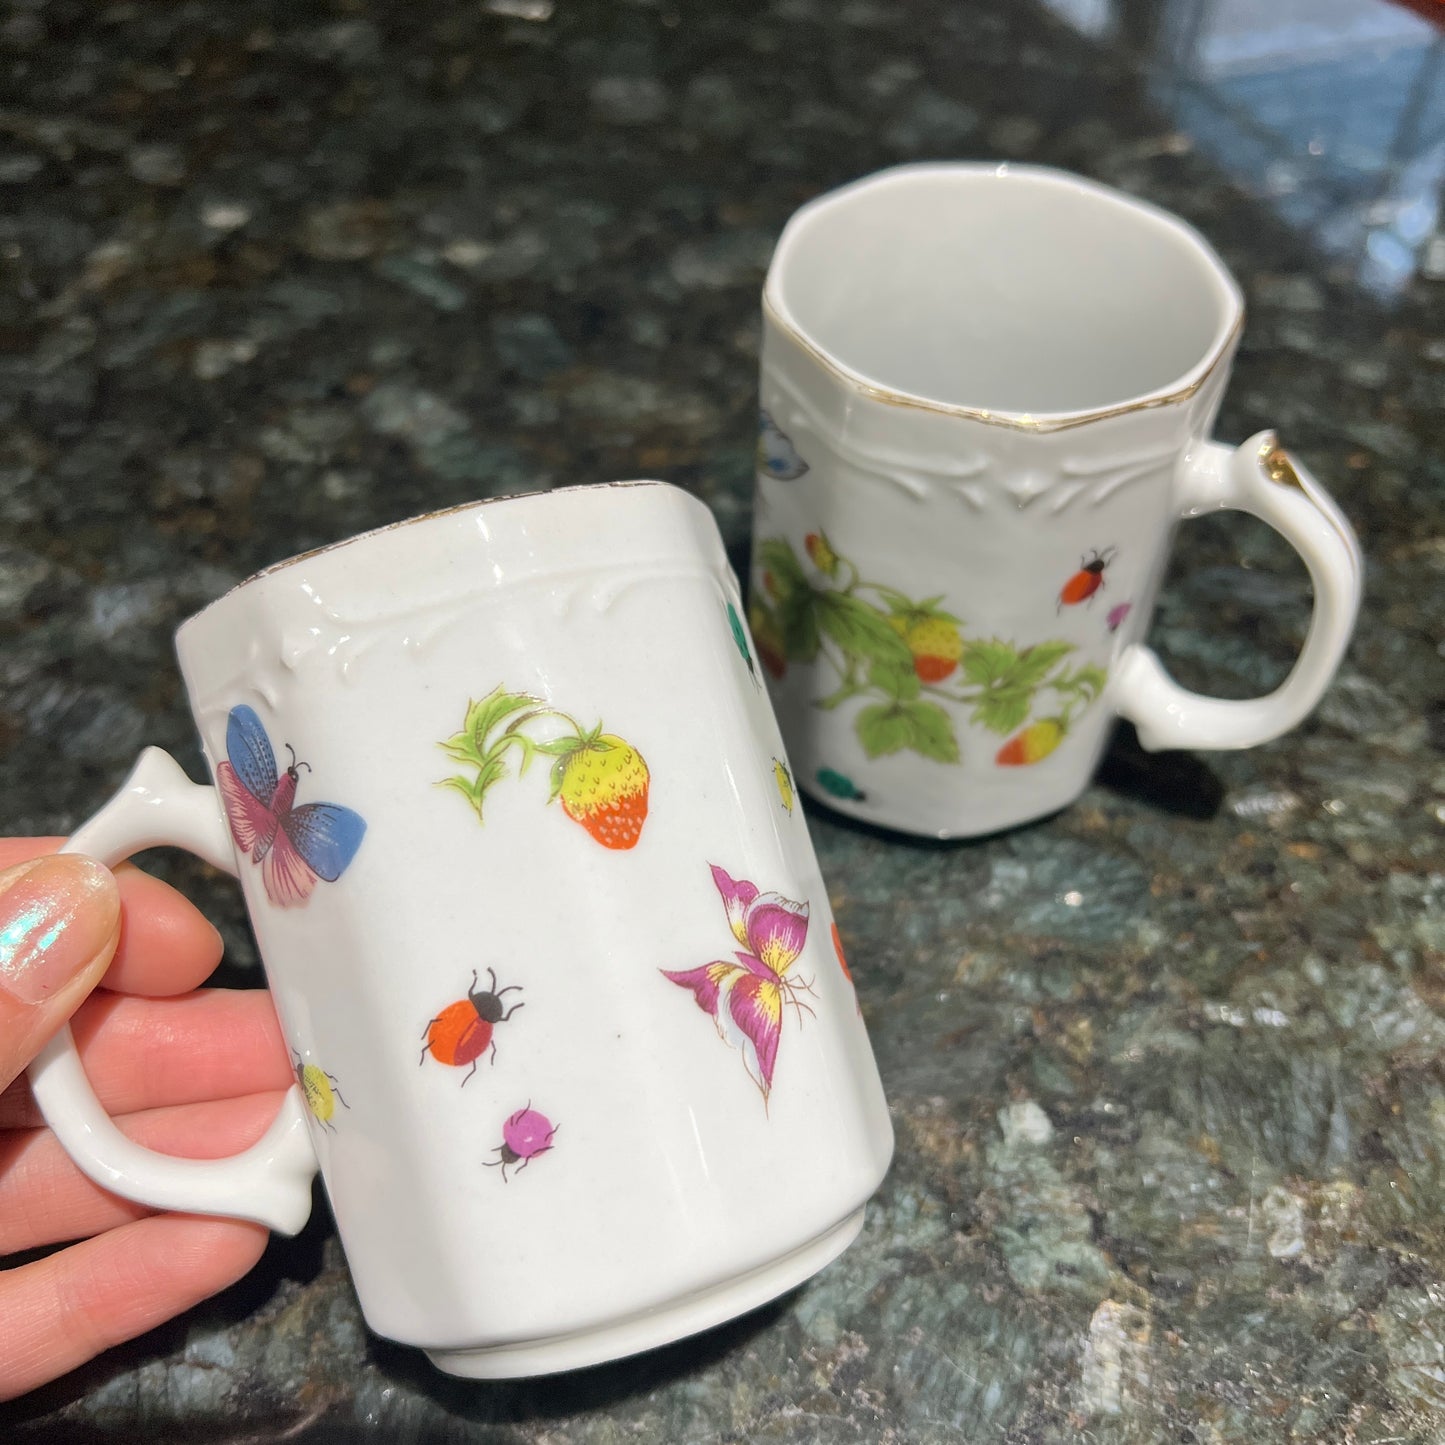 Vintage Linwile Ardalt Coffee/Tea Mugs - Set of 2 Butterfly Strawberry Ladybug Porcelain Cups with Gold